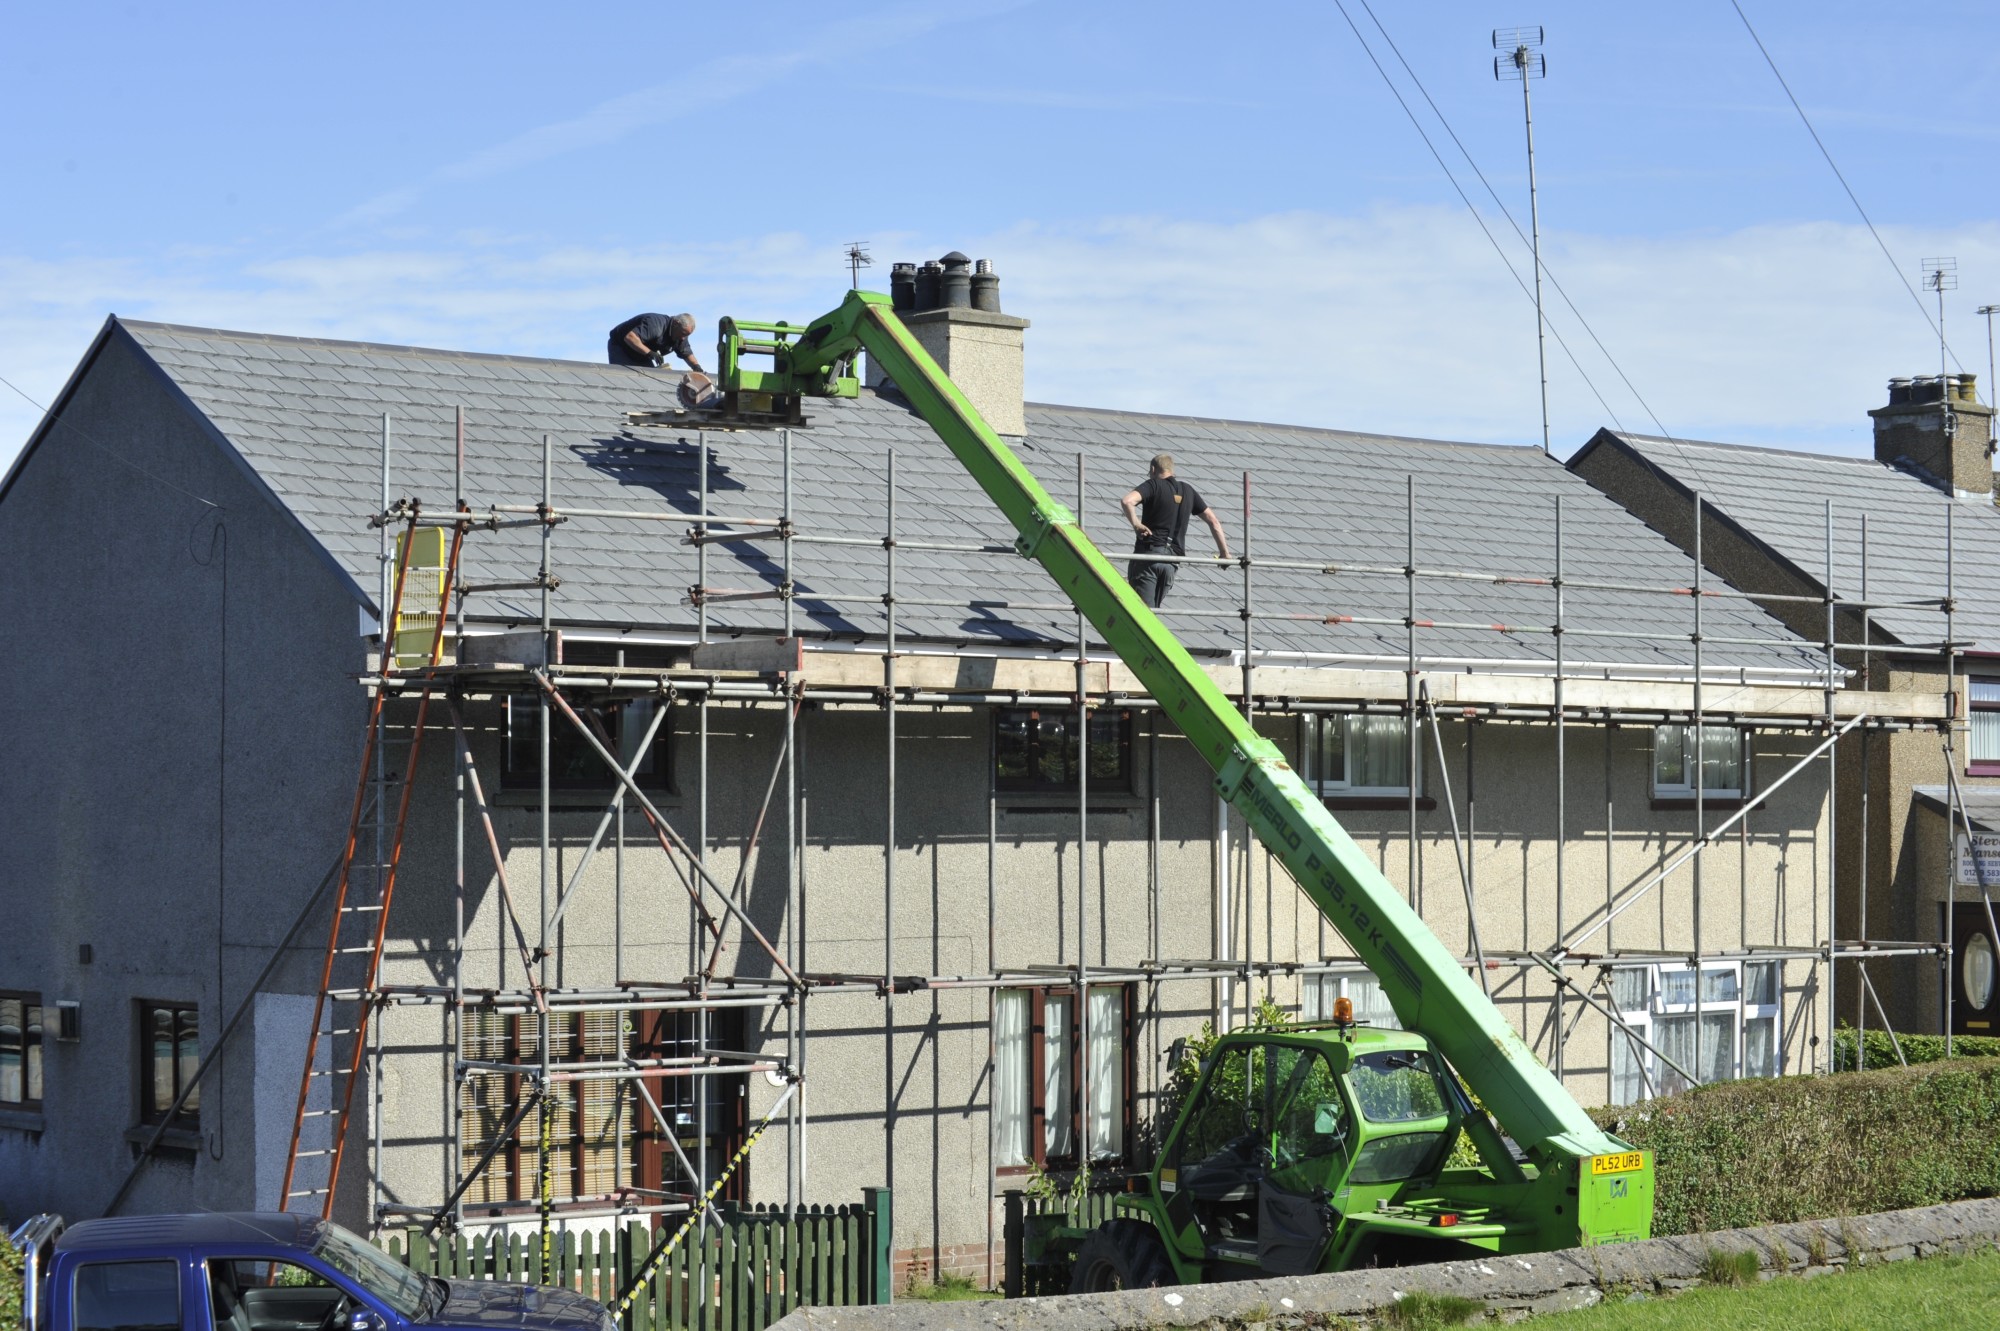 People Fixing a Roof Using a Scaffolding